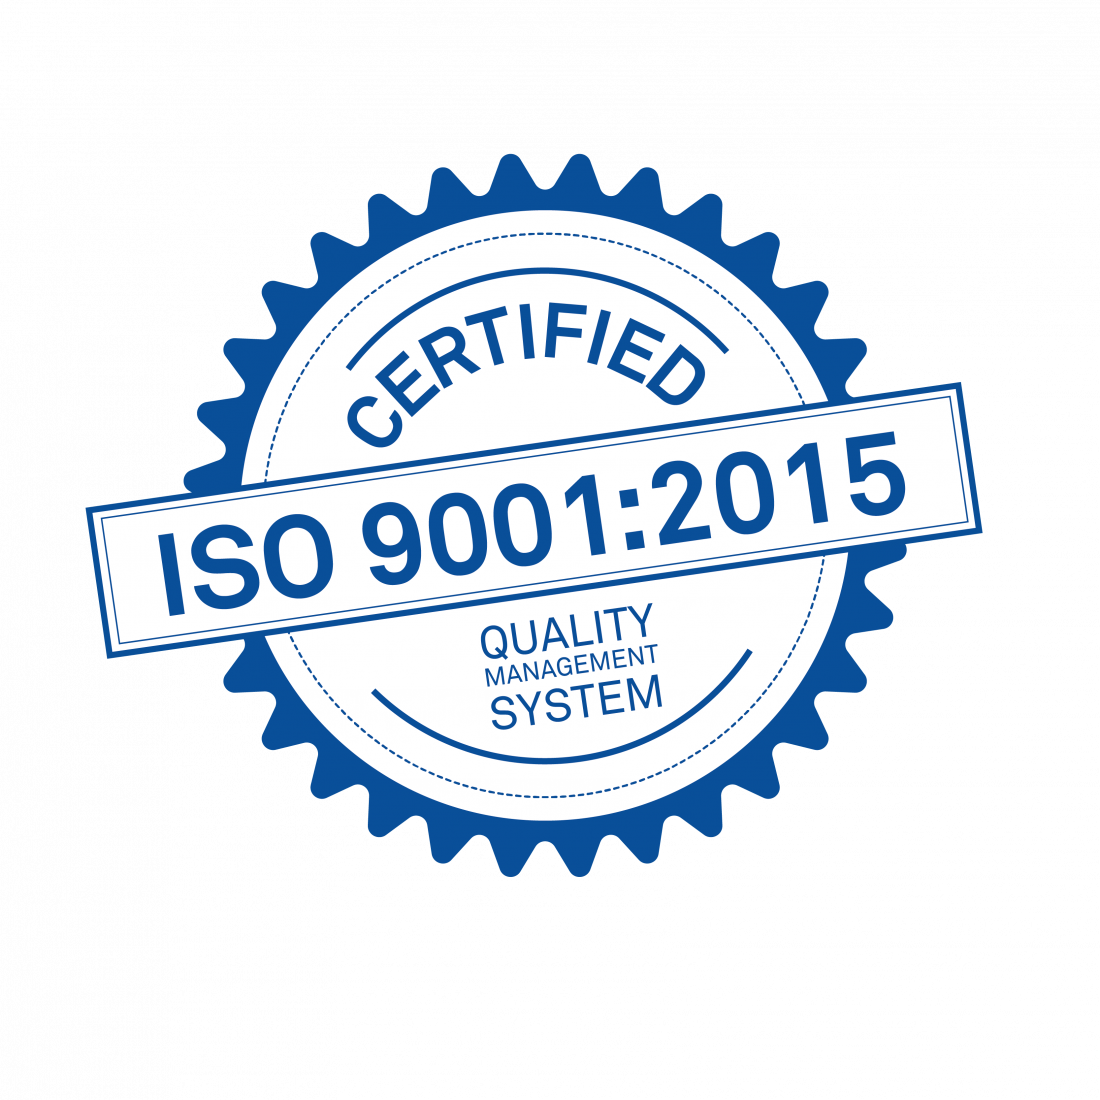 The Baker Company receives ISO 9001:2015 certification